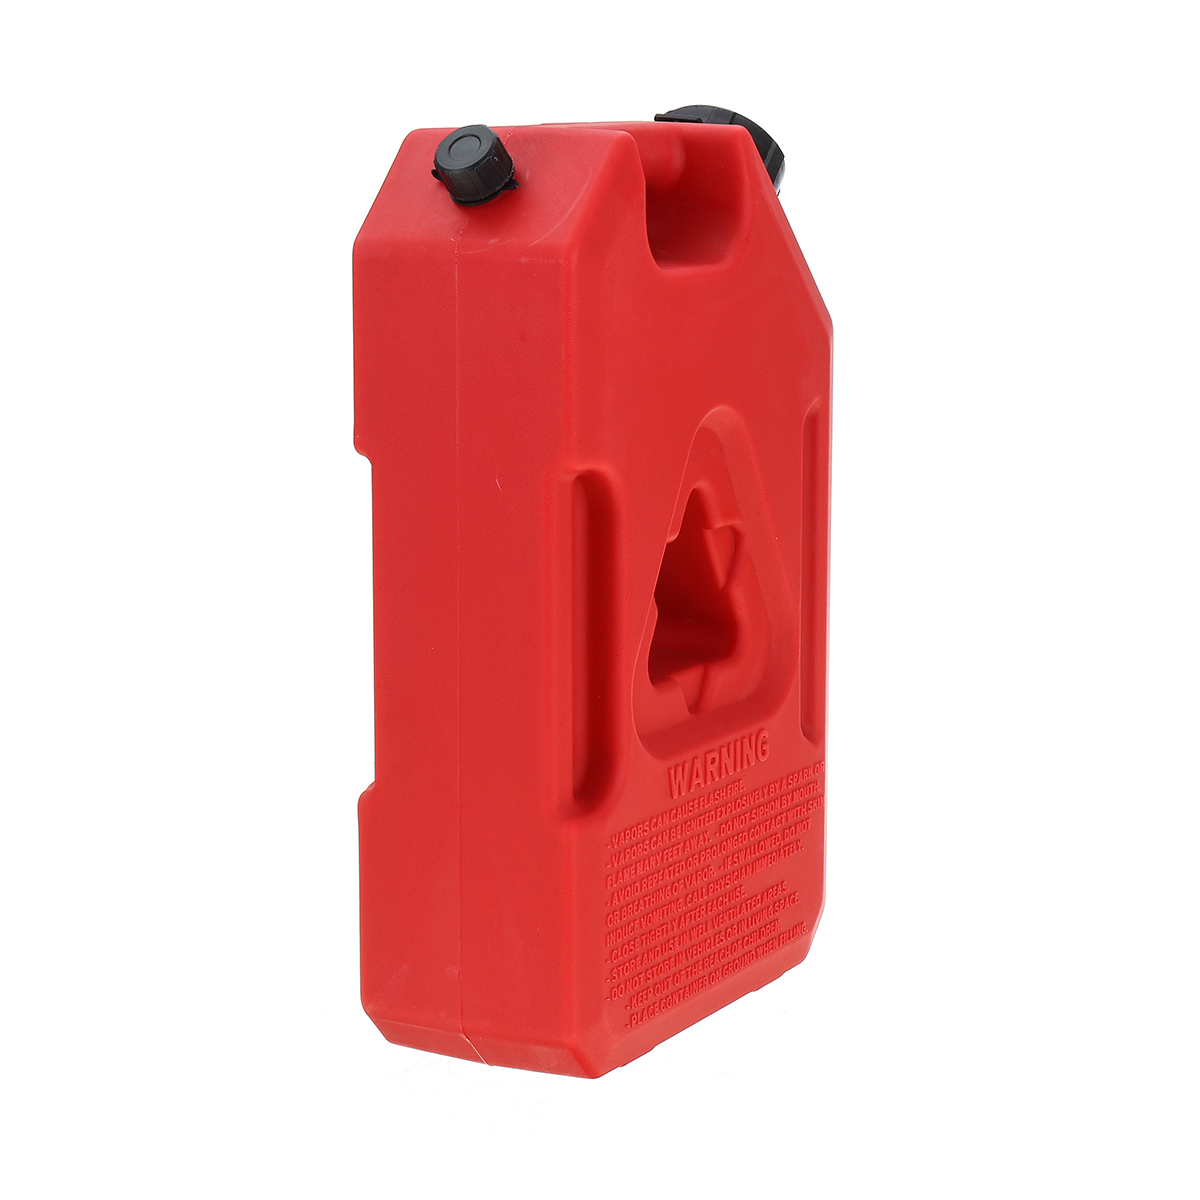 3.8L/7.5L Fuel Container Petrol Gas Fuel Plastic Can Tank Spare Portable Heavy Duty